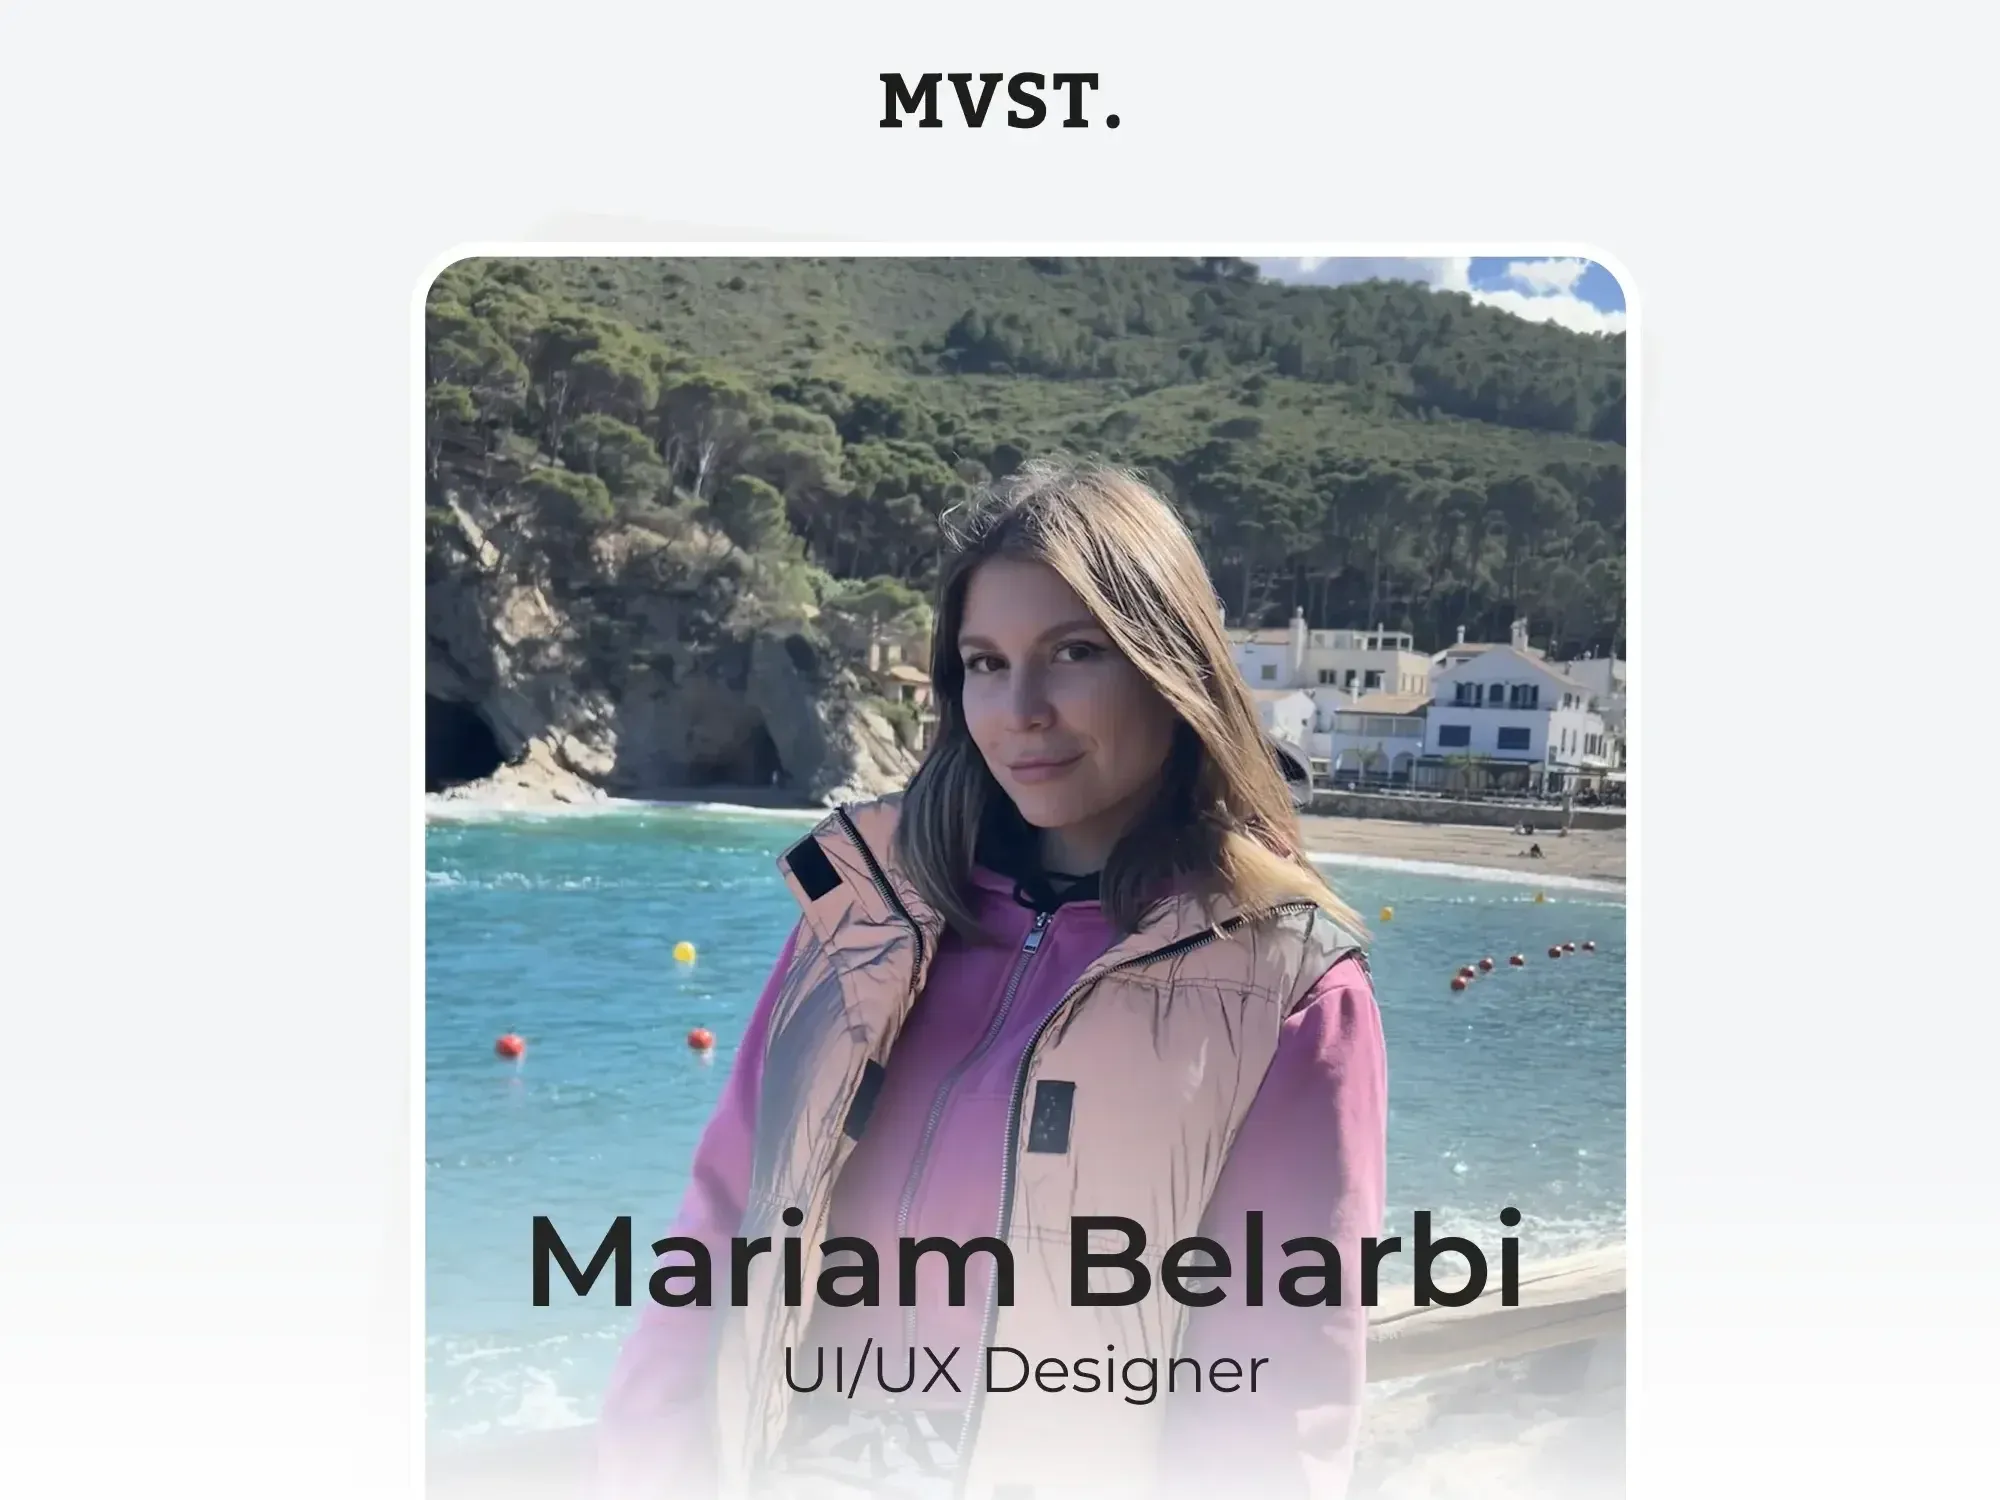 Welcome to MVST, Mariam!